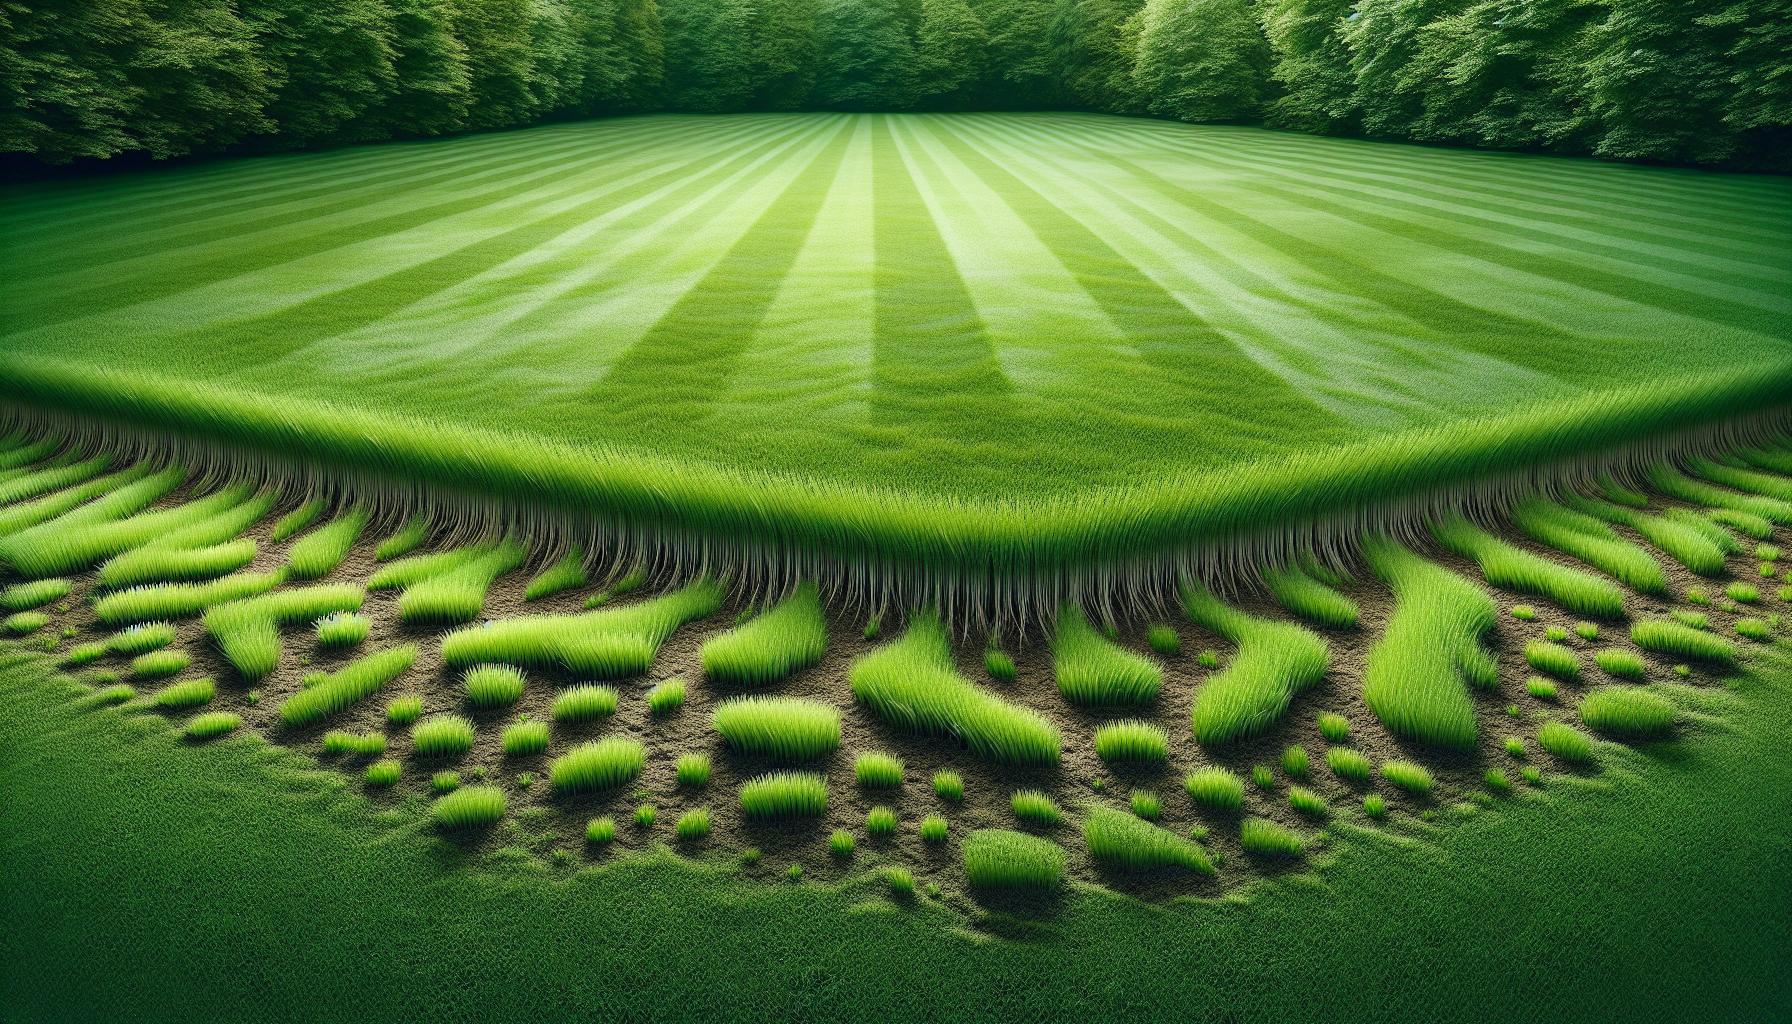 vibrant green lawn cross section